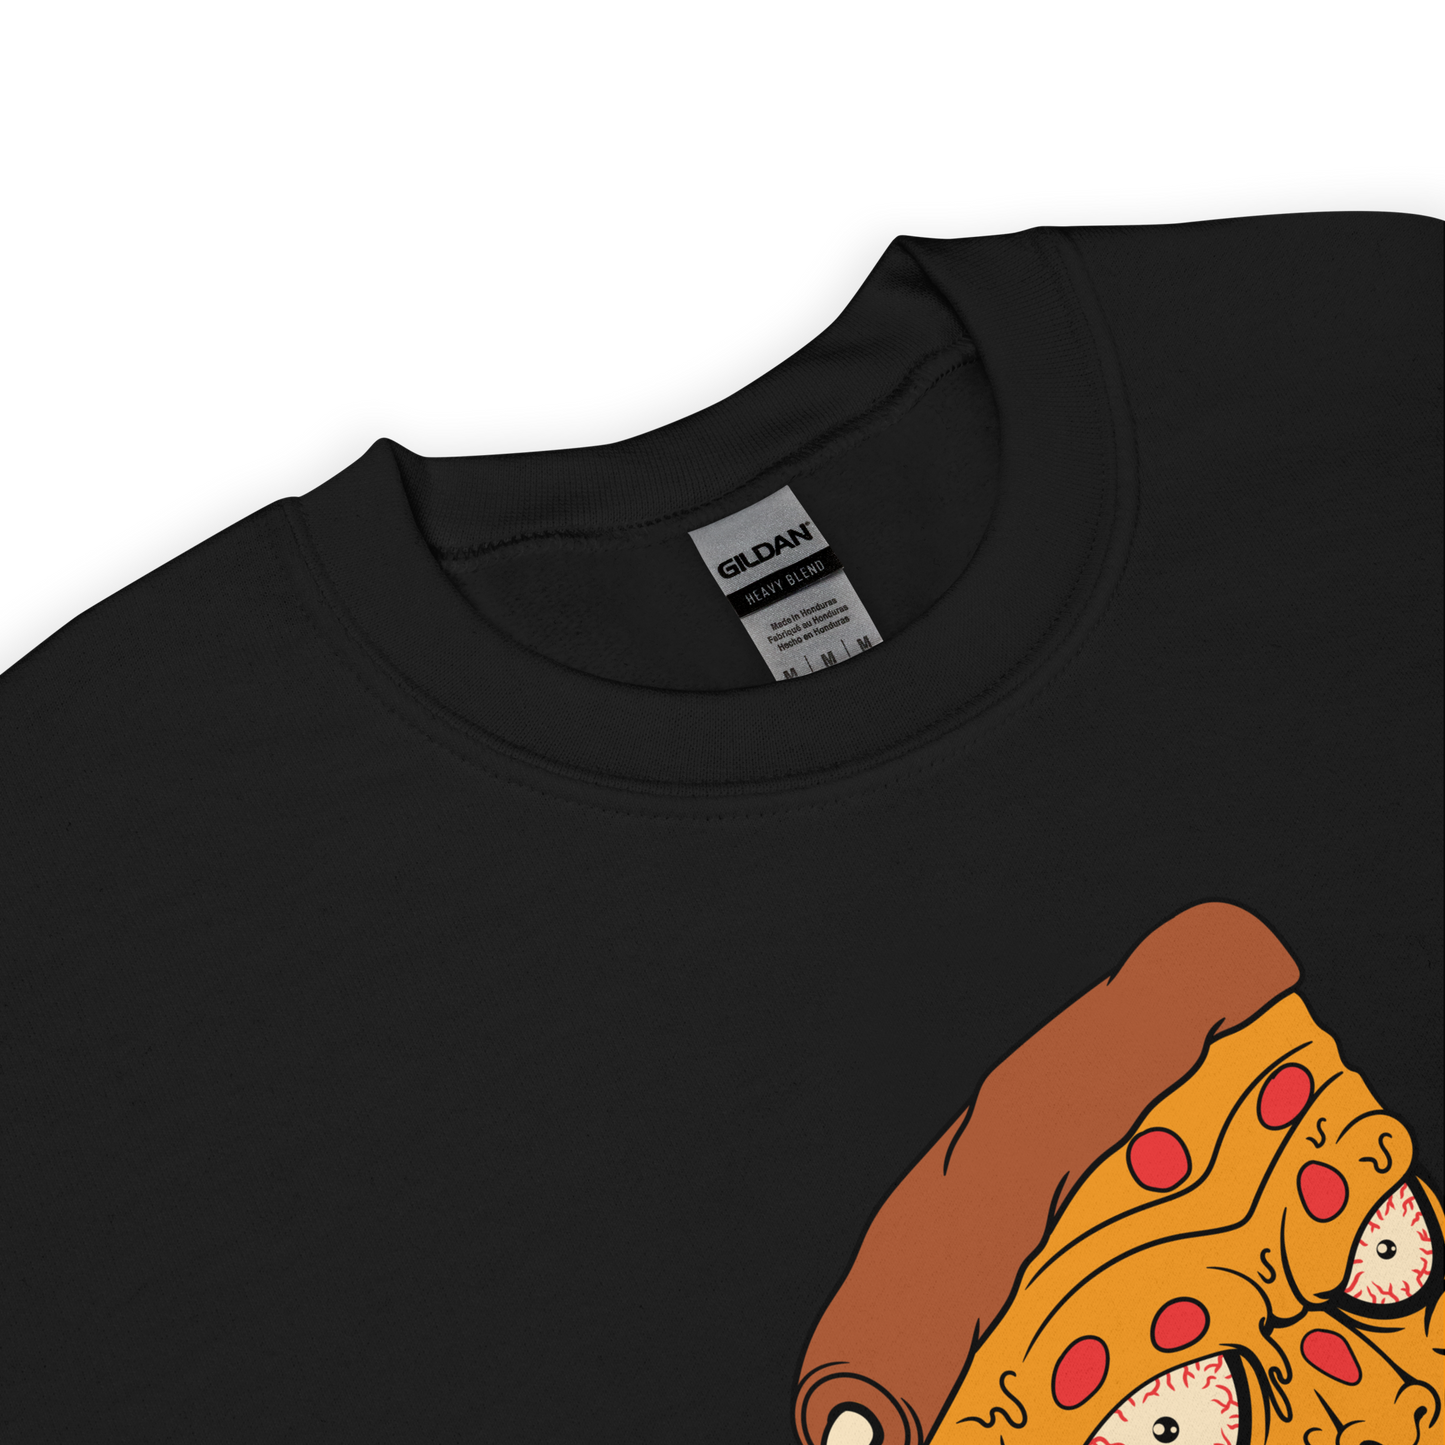 Product details of a Black Melting Pizza Sweatshirt featuring a Meltdown Madness graphic on the chest - Funny Graphic Pizza Sweatshirts - Boozy Fox